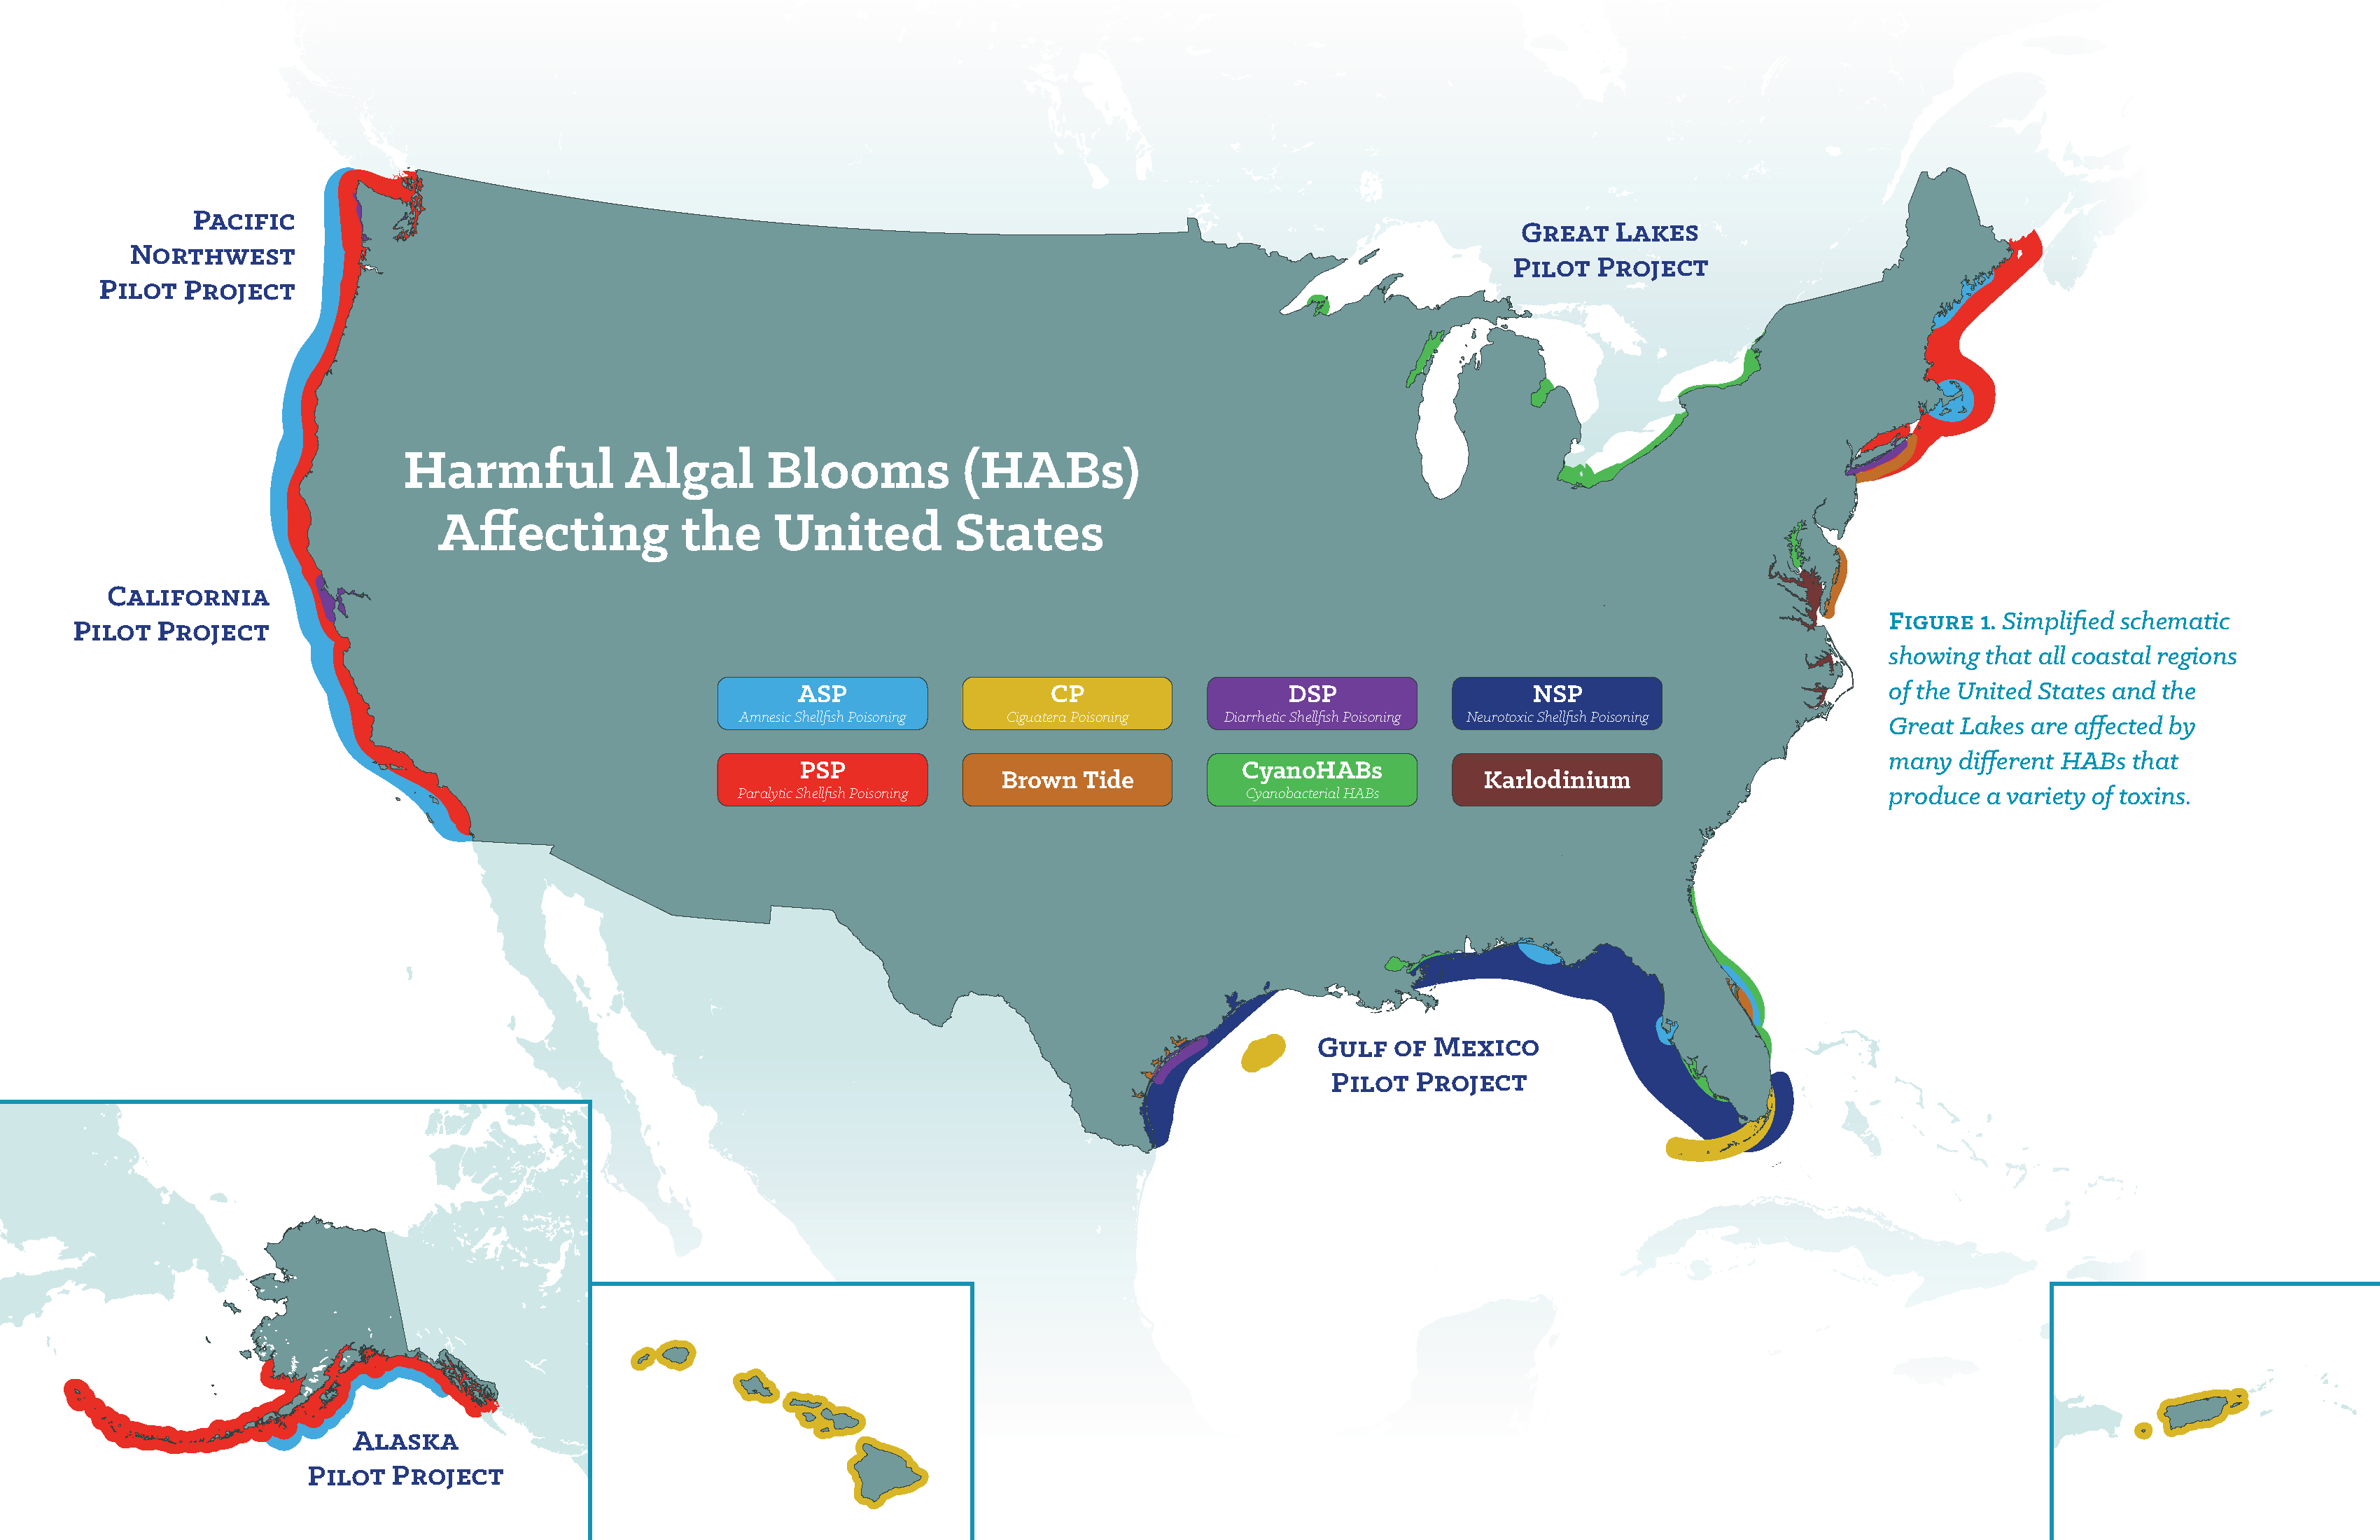 A map shows NHABON pilot project locations: Great Lakes, Gulf of Mexico, California, and the Pacific Northwest